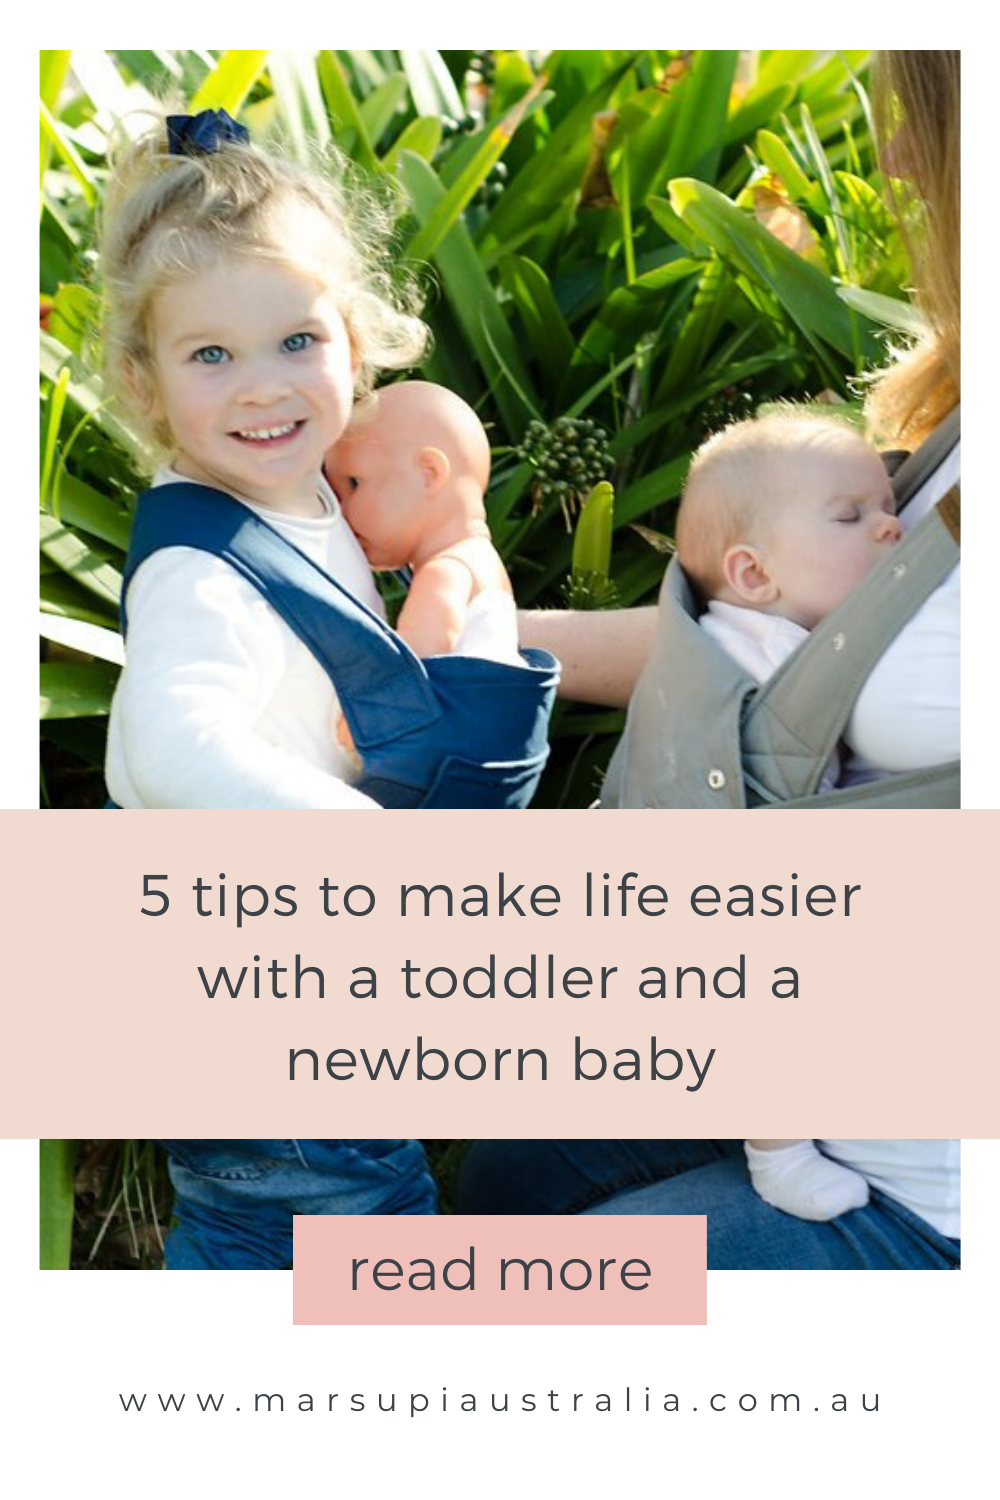 Life gets easier with a baby –